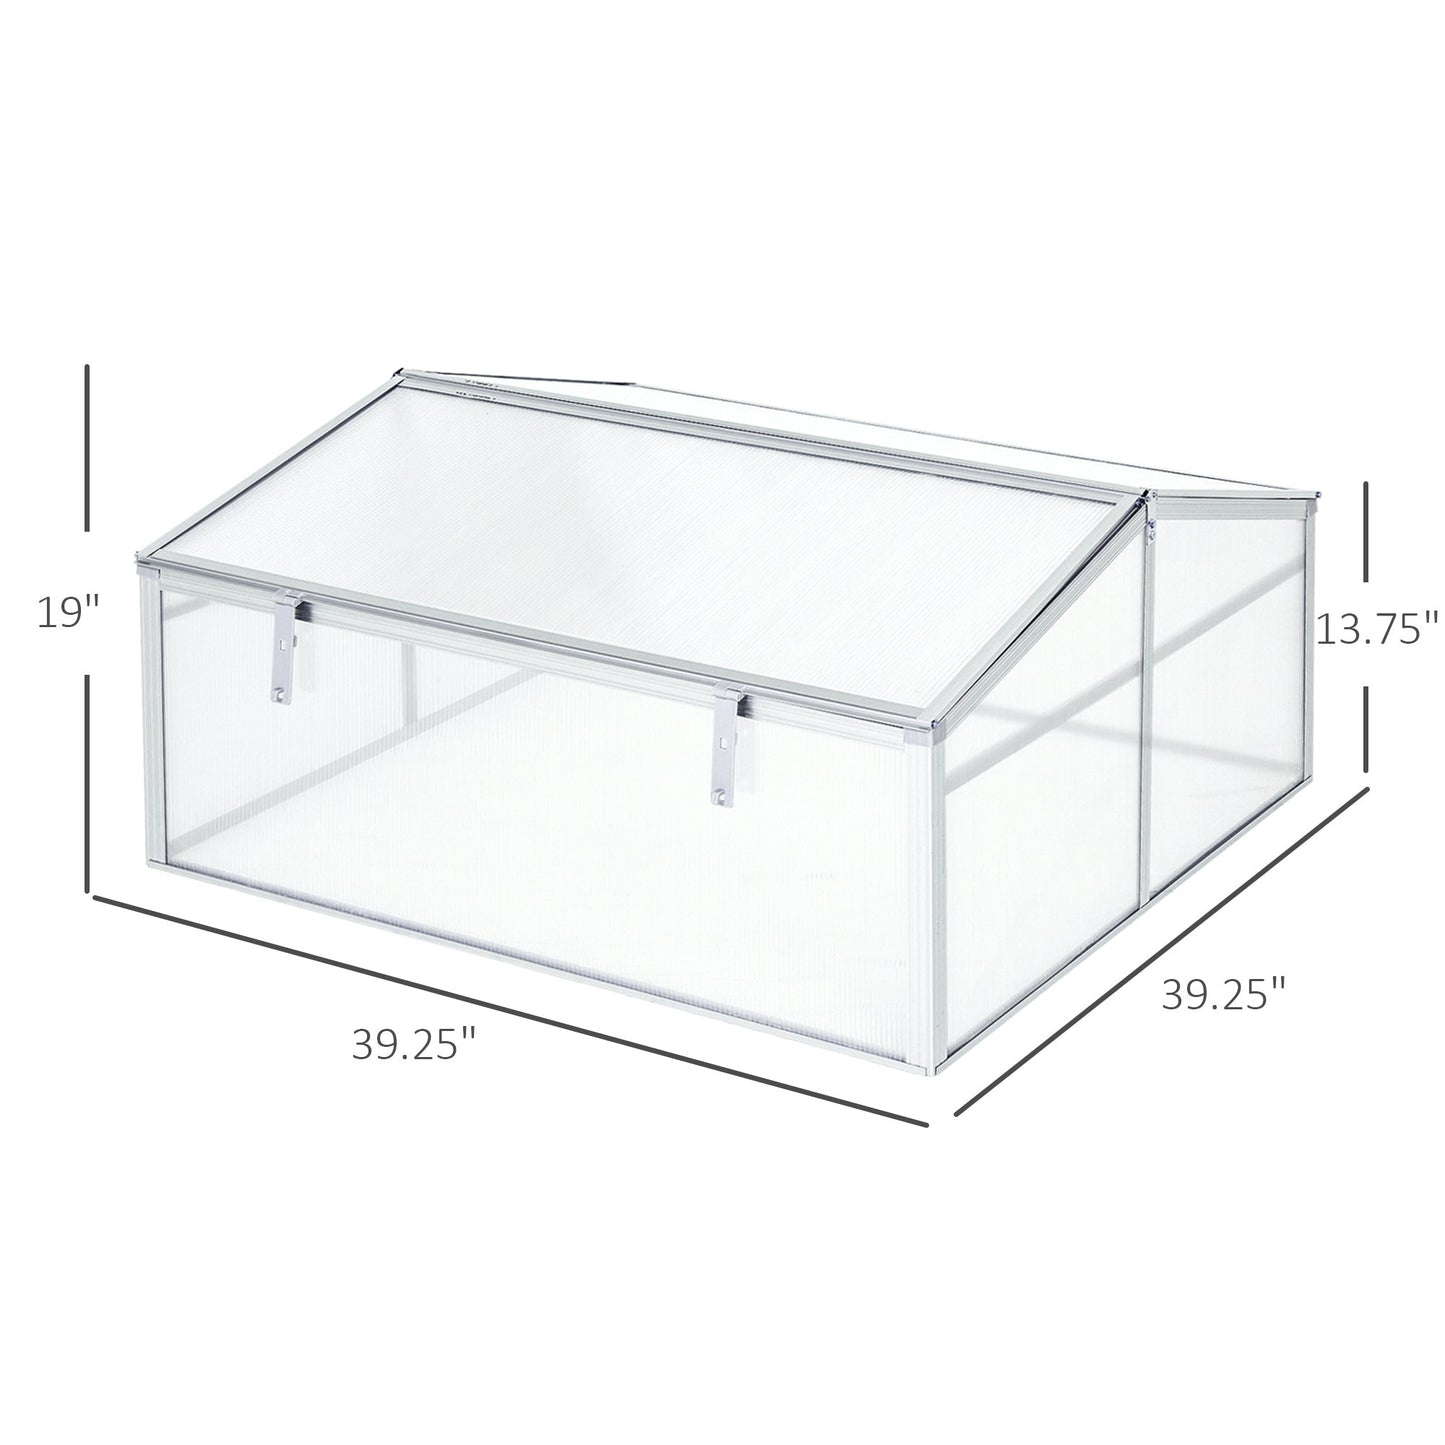 Aluminium Cold Frame Greenhouse Garden Portable Raised Planter with Openable Top for Indoor, Outdoor, Flowers, Vegetables, Plants, 39" x 39" x 19" - Gallery Canada